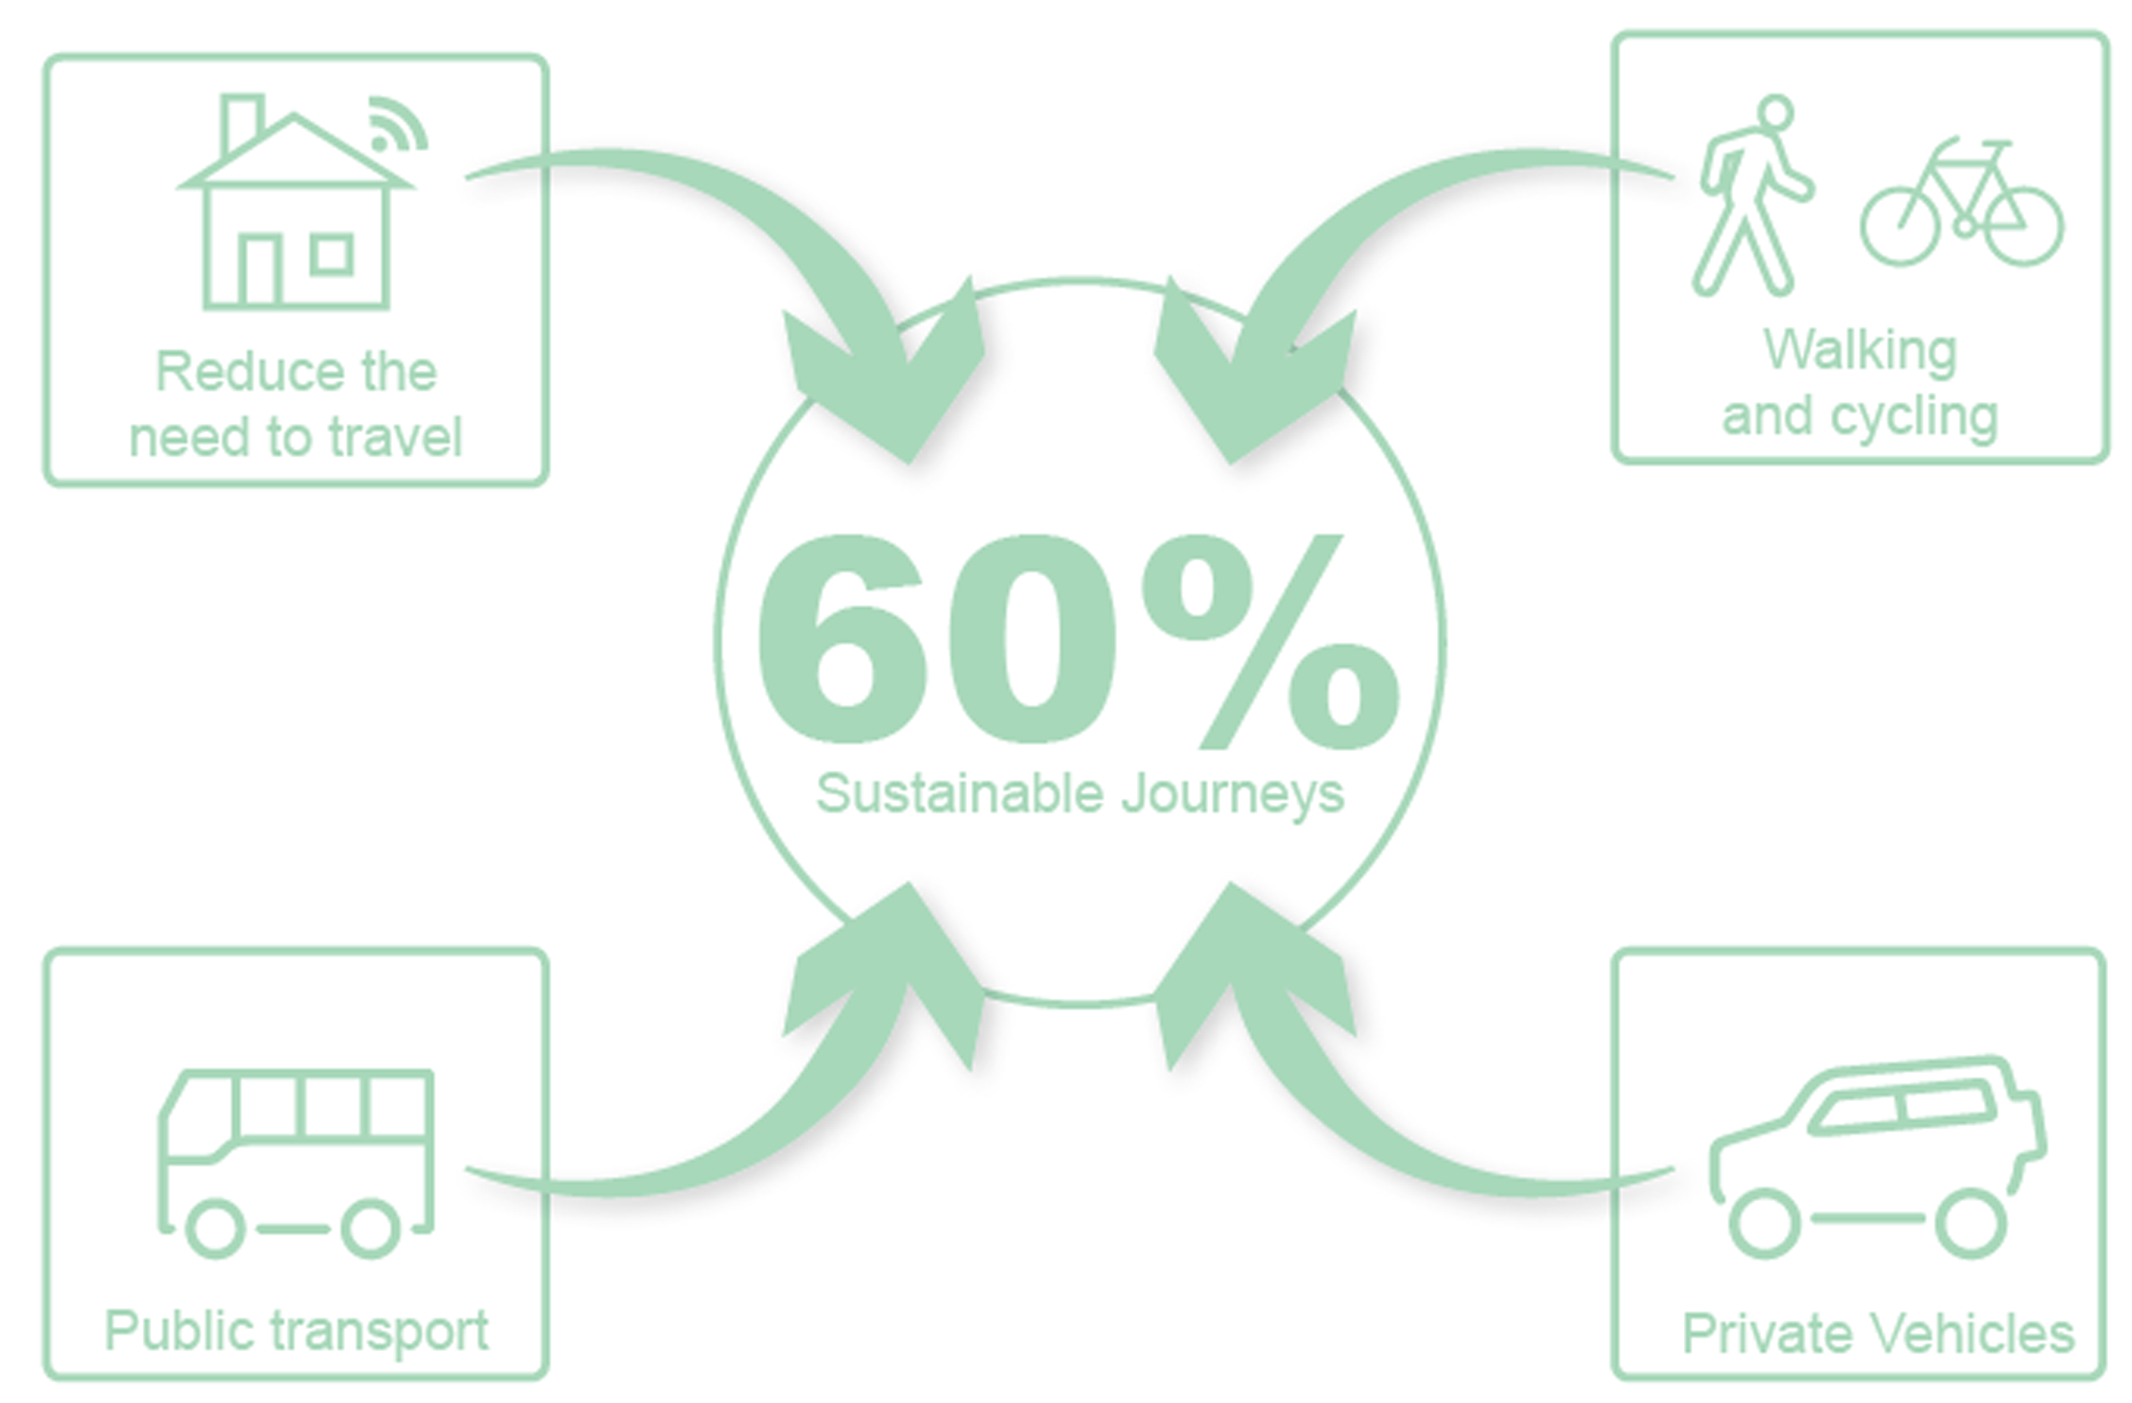 Transport infographic showing 60% of sustainable journeys